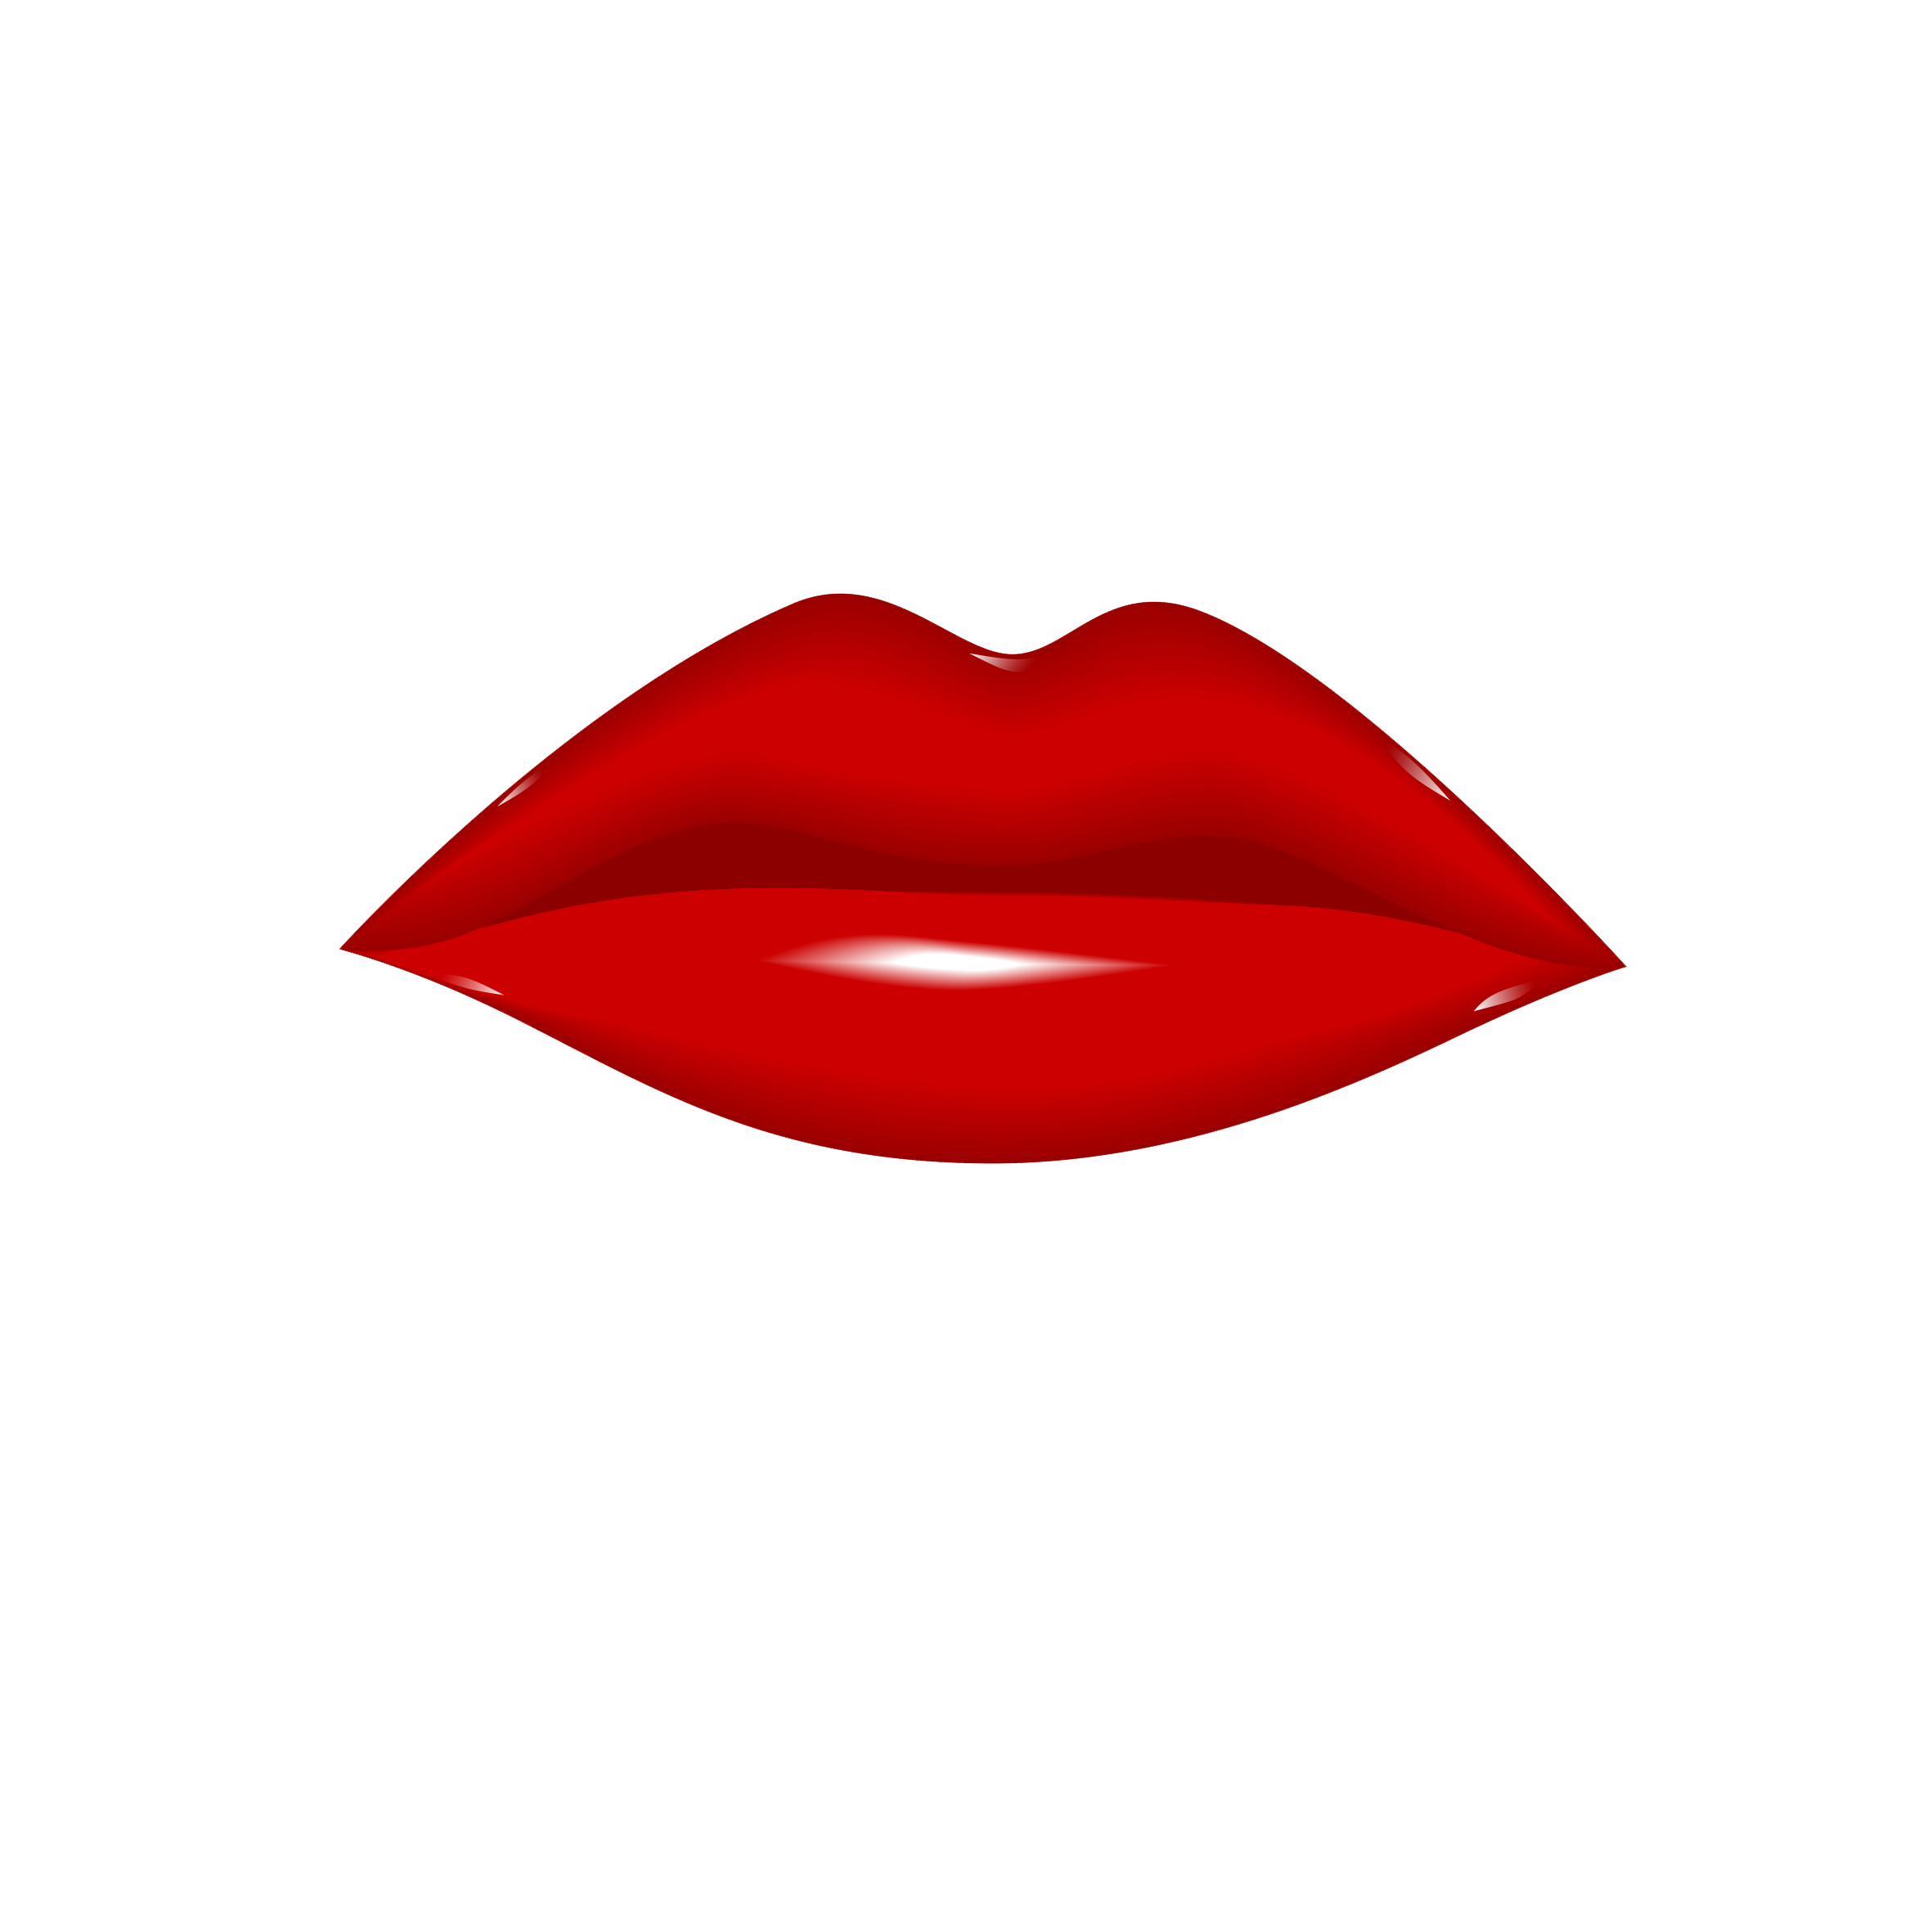 Red Lipstick Big Red Lips Png Download 2362 2362 Free Transparent Red Png Download Clip Art Library